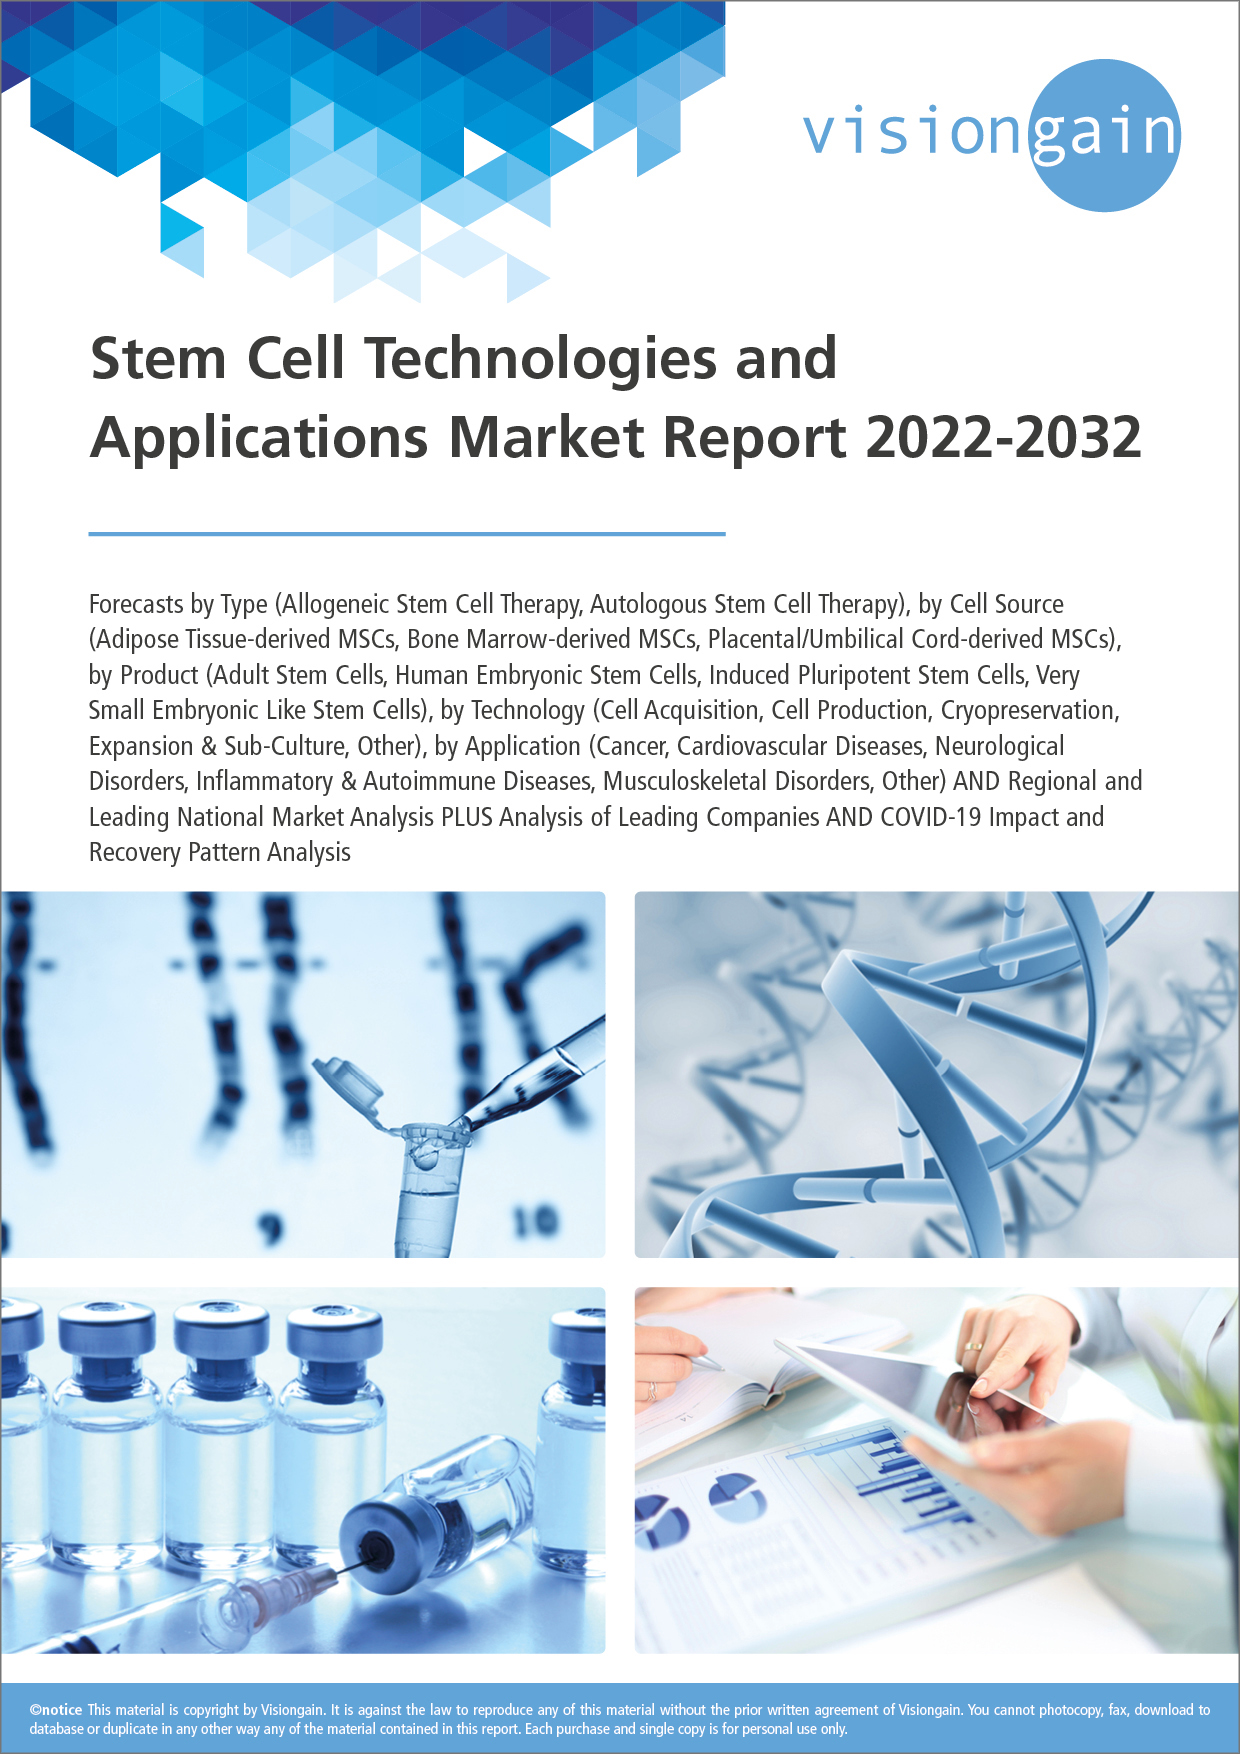 Stem Cell Technologies and Applications Market Report 2022-2032